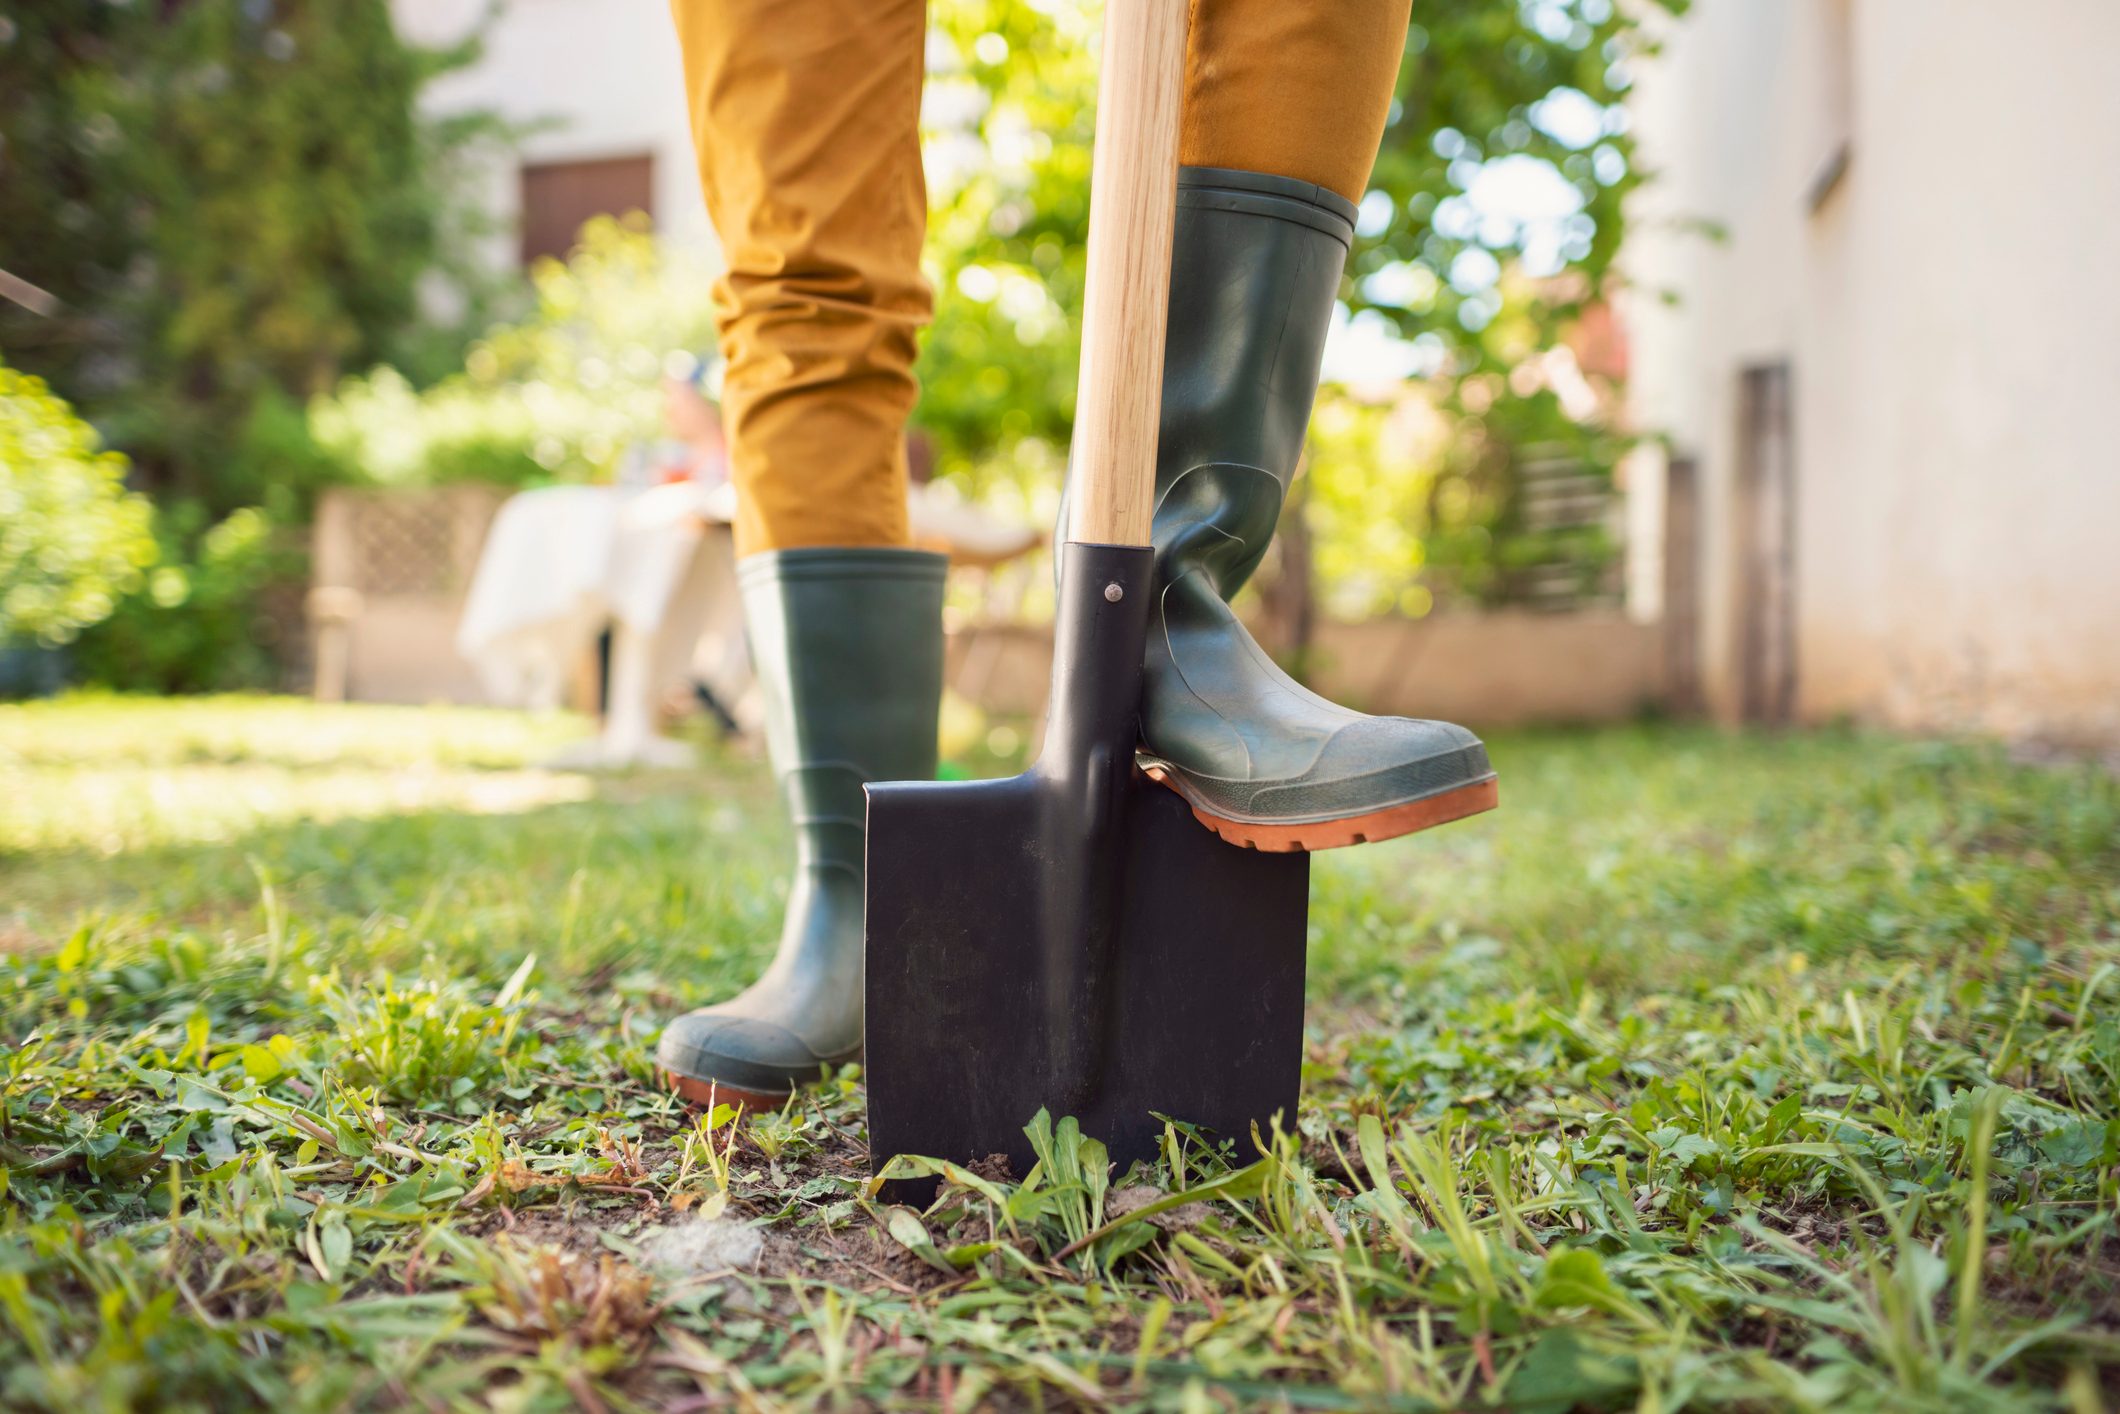 Setting Up a New Garden: Choose the Right Site